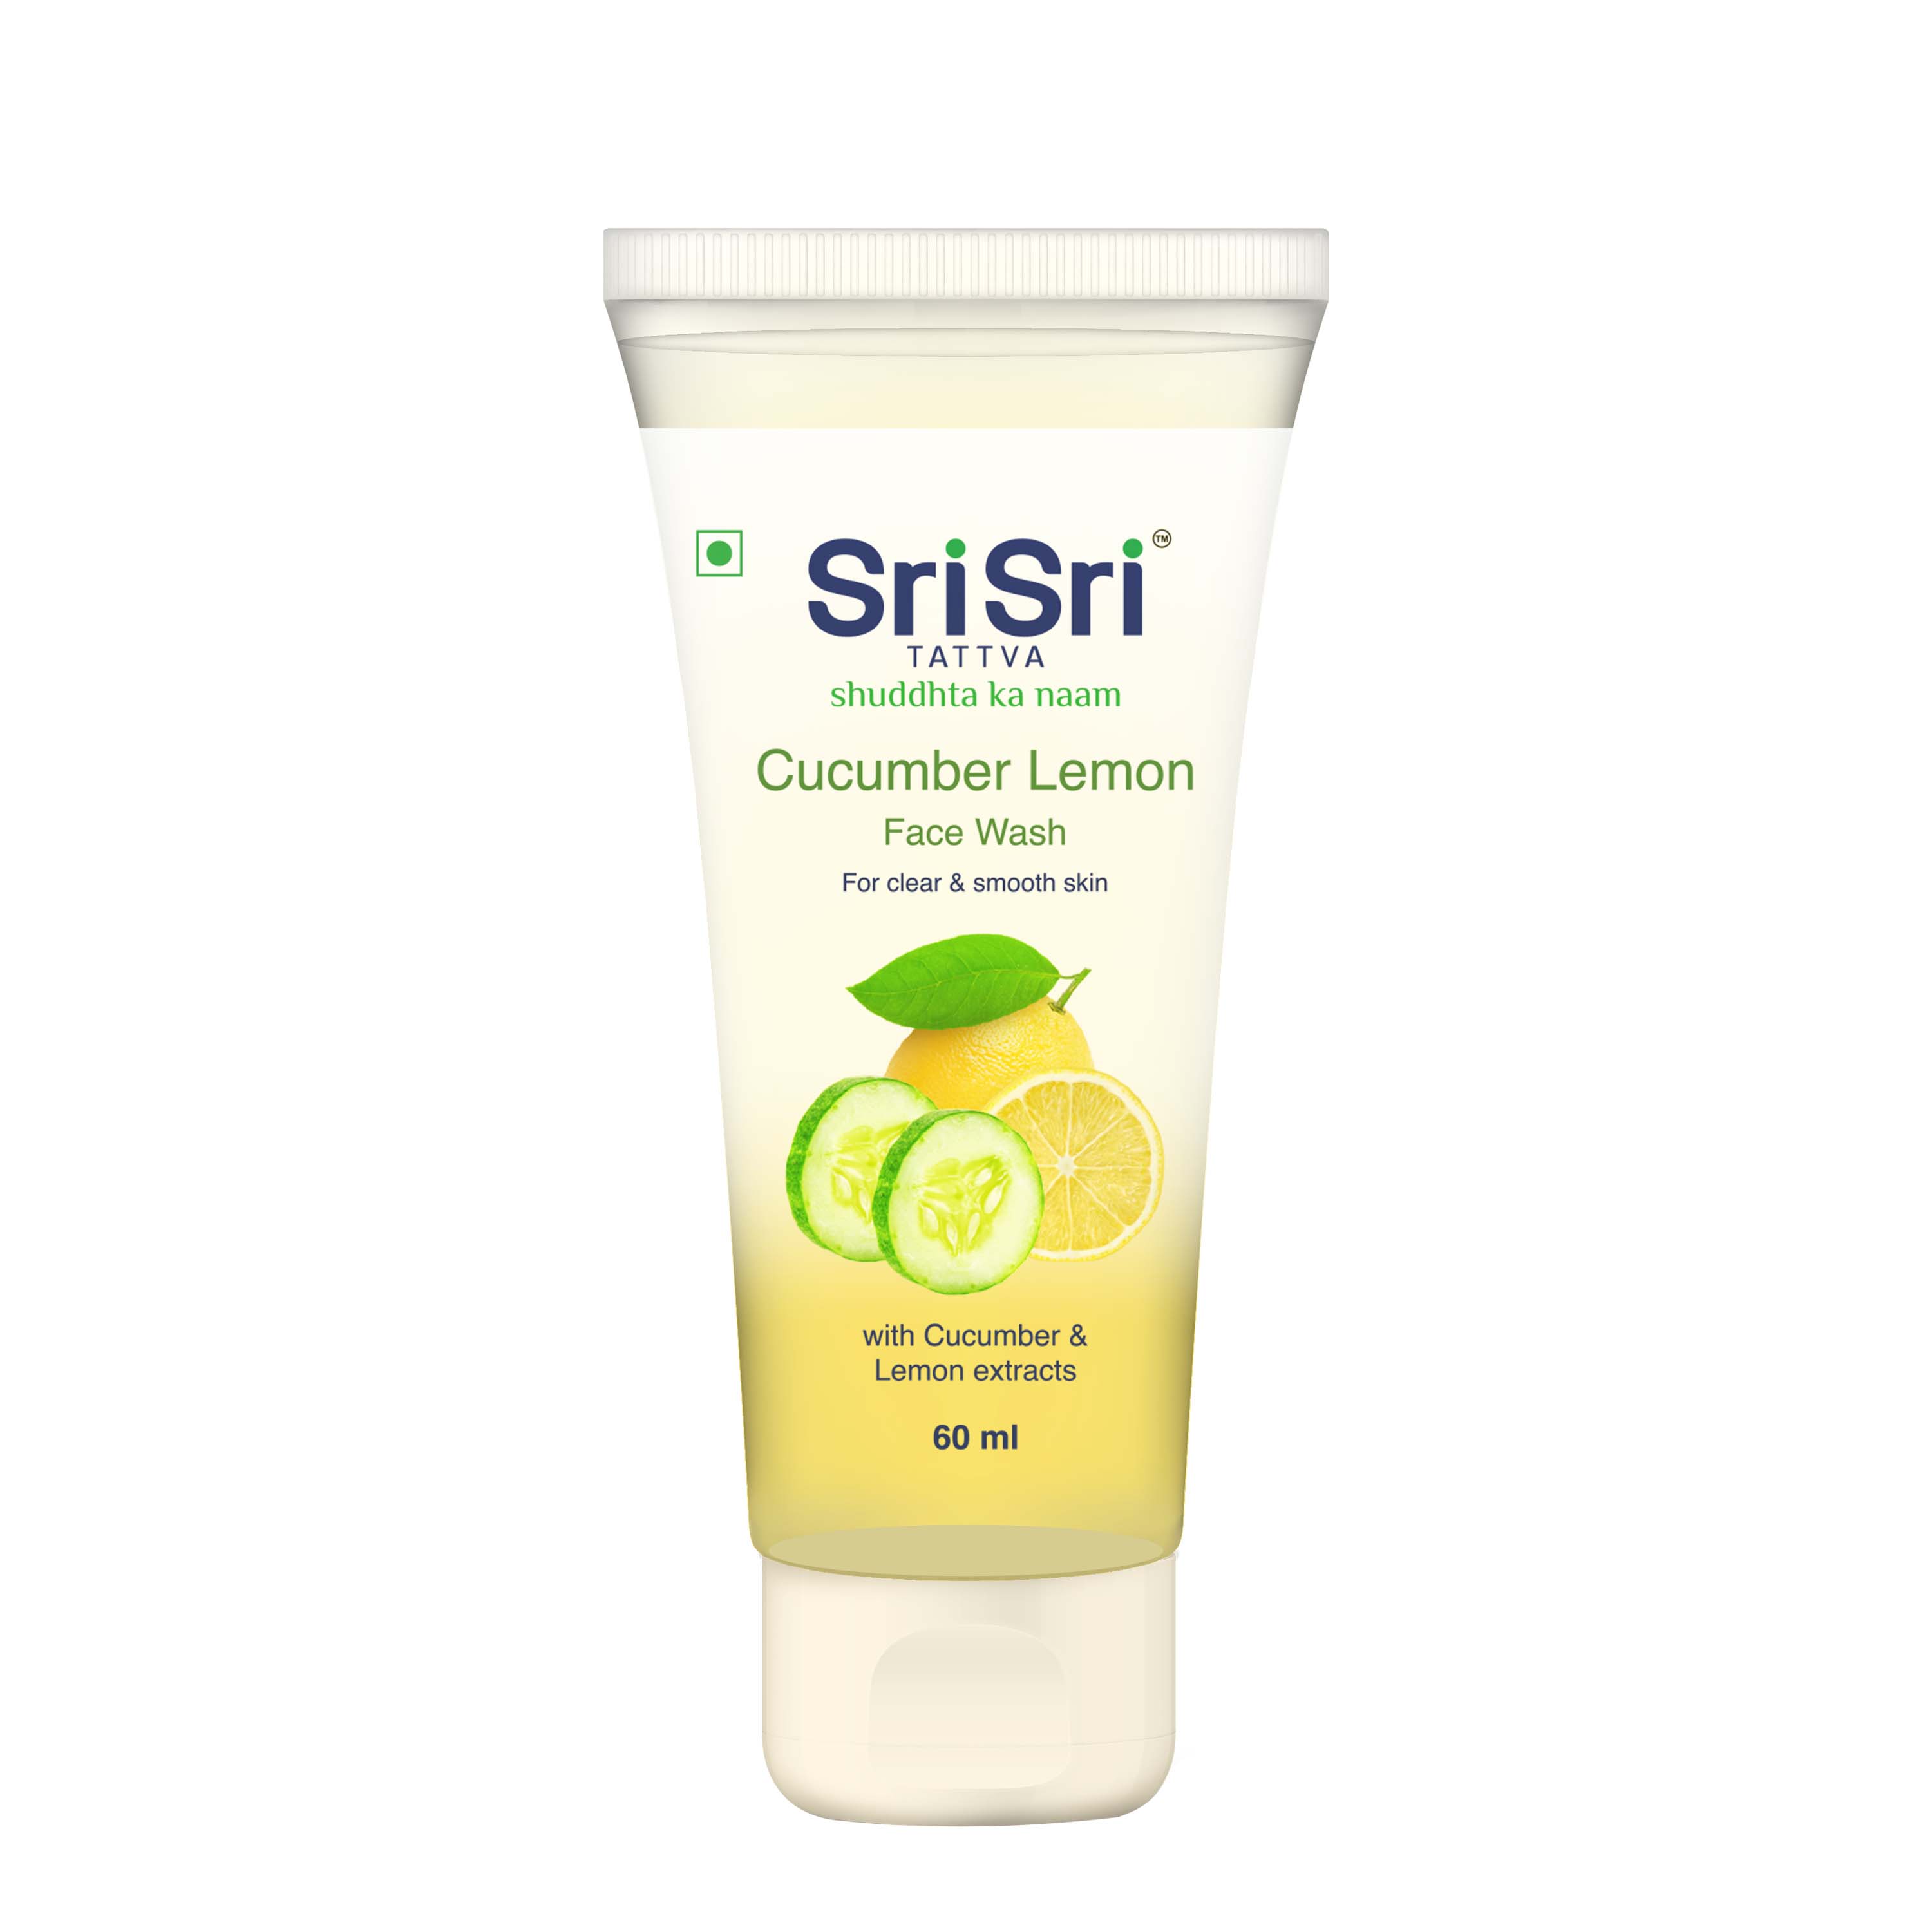 Cucumber & Lemon Face Wash - For Clear & Smooth Skin, 60 ml